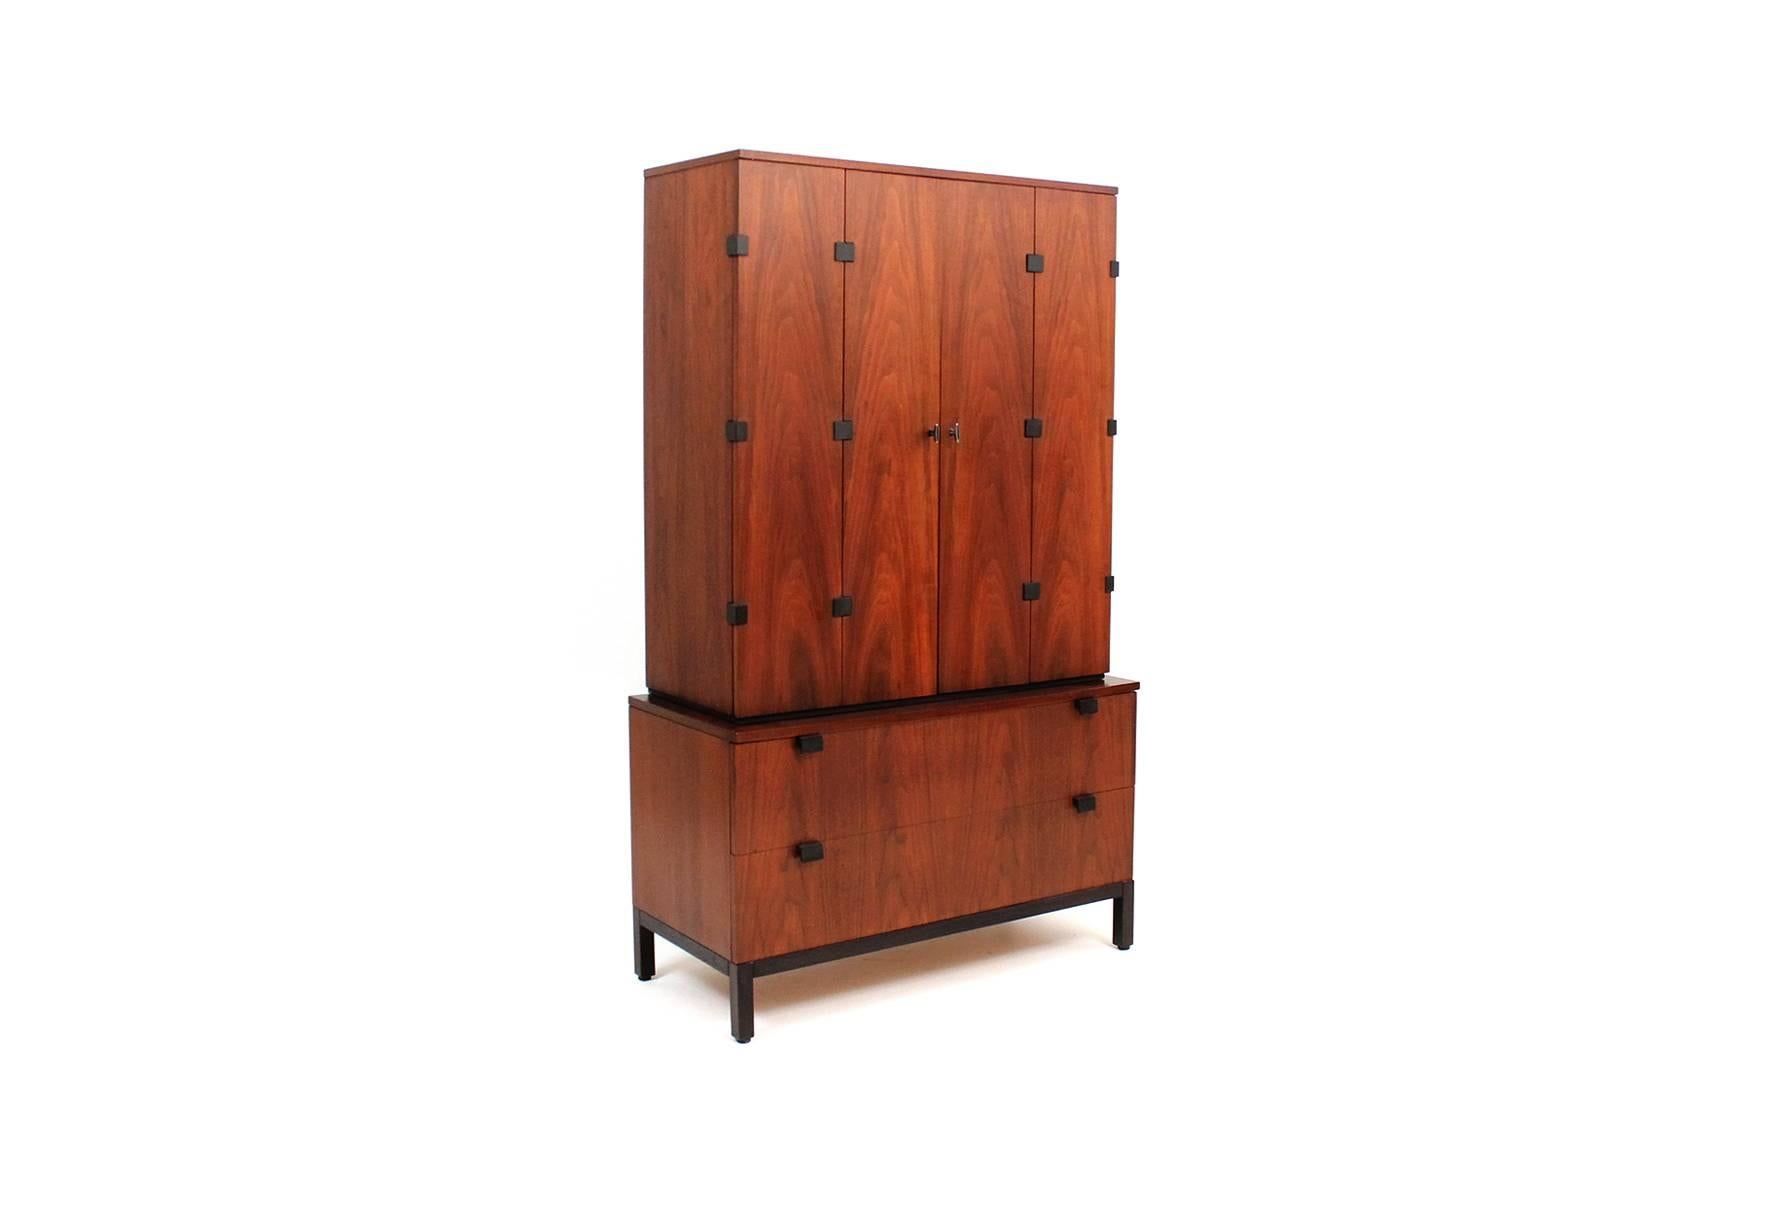 Two piece wardrobe cabinet and dresser designed by Milo Baughman for Directional.  The top piece has bi-fold doors that reveal numerous shelving options for storage.  Bottom piece is a two drawer dresser.  Both pieces have the sculptural ebonized